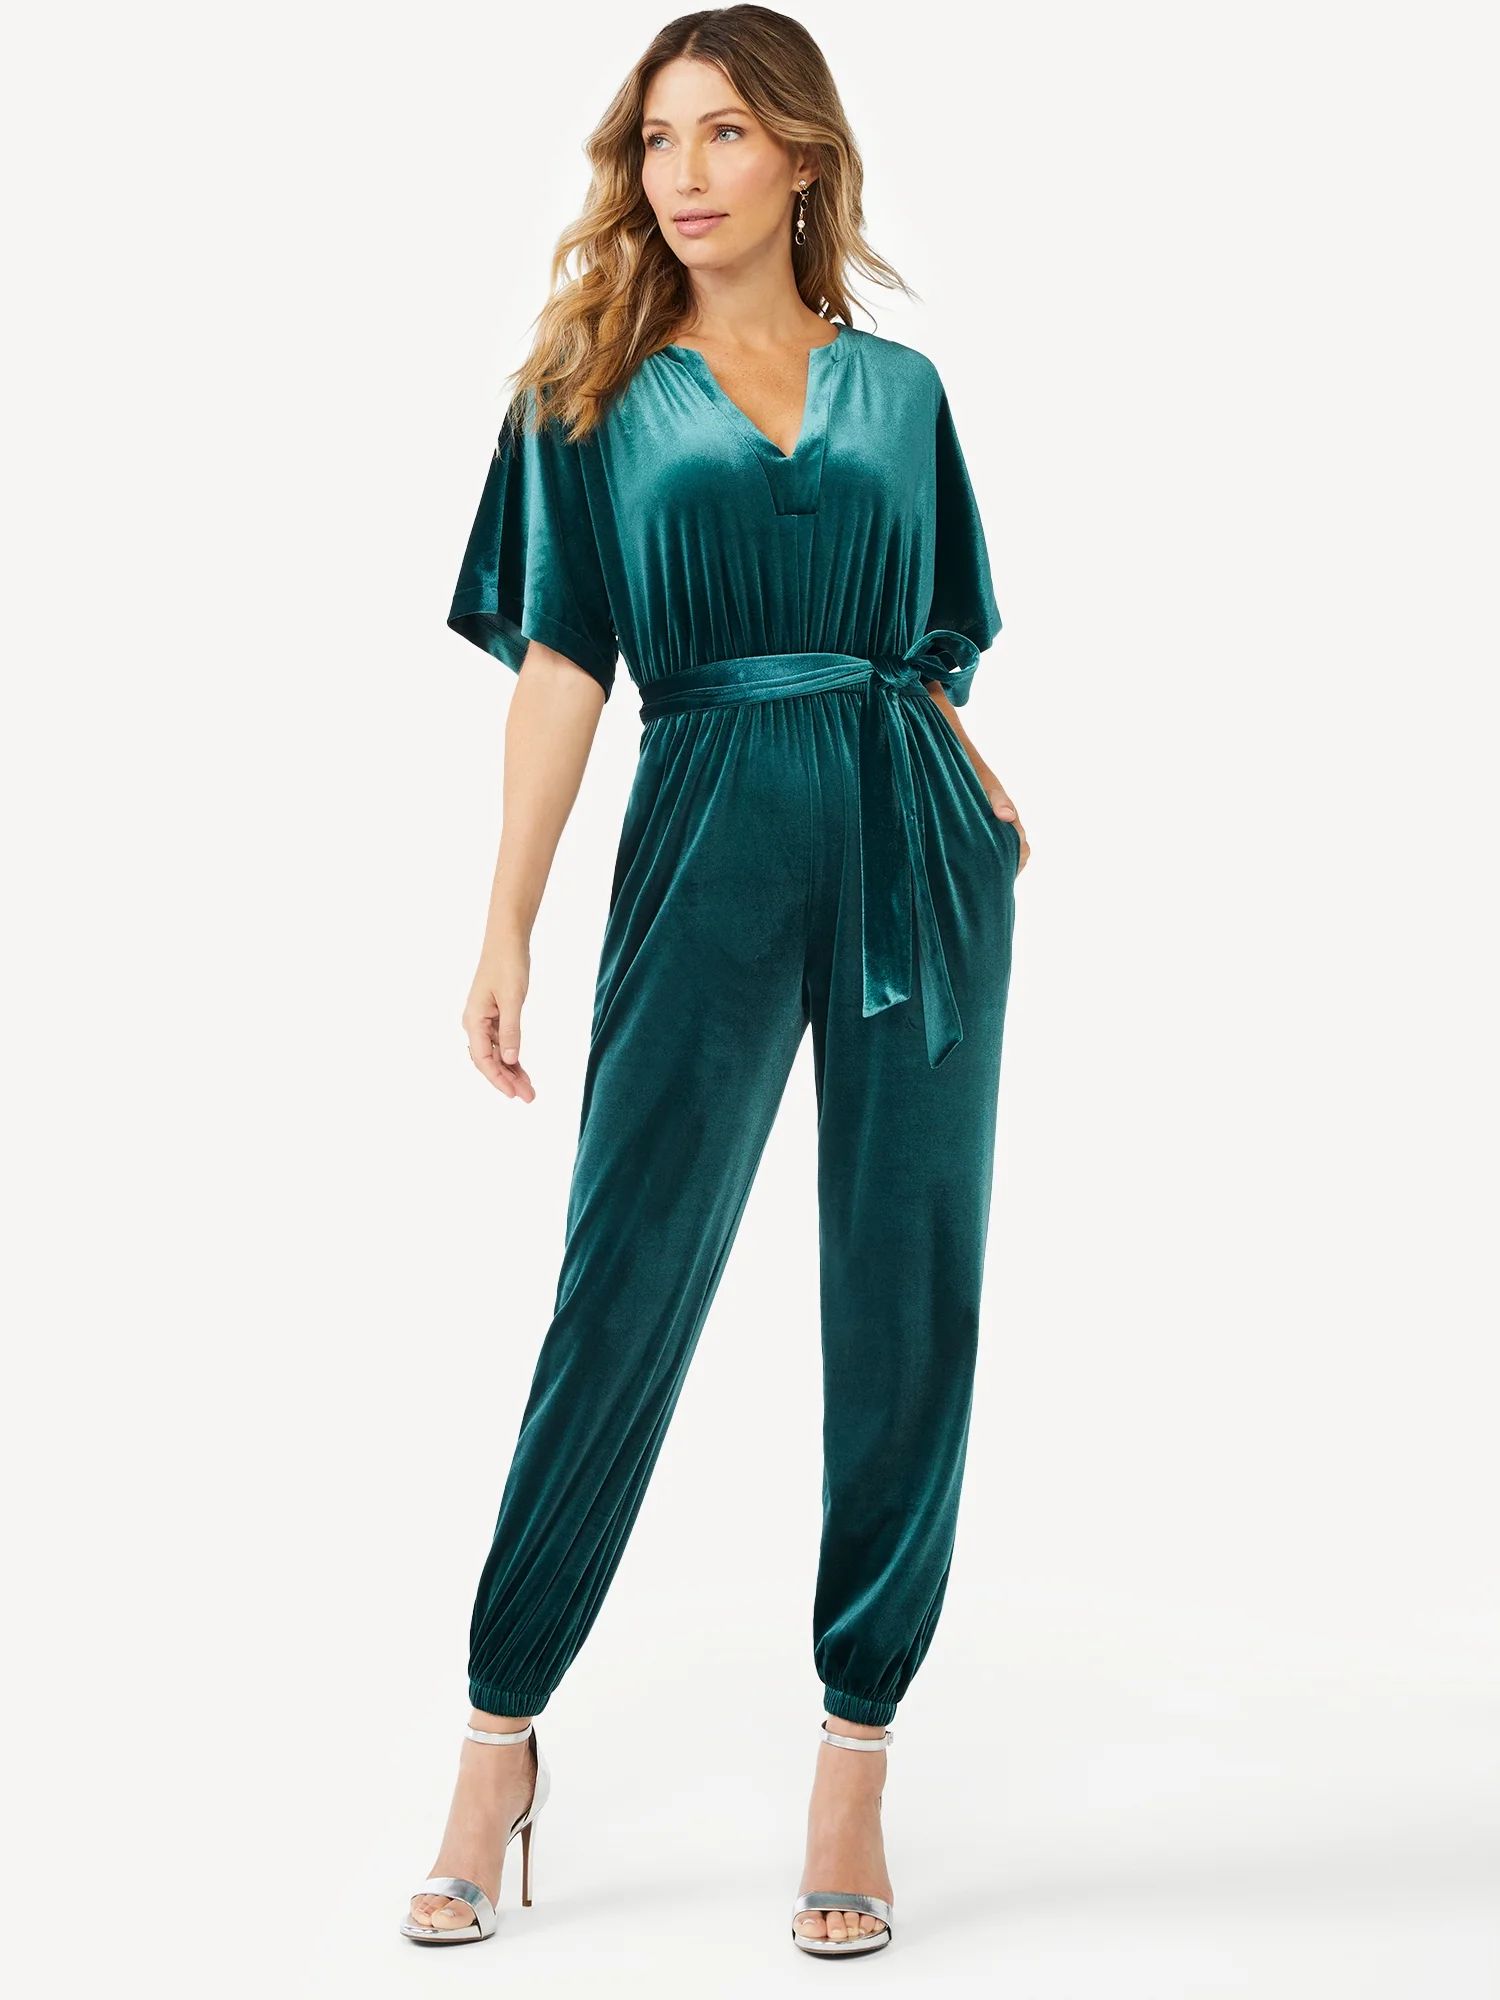 Sofia Jeans by Sofia Vergara Women's Velvet Jumpsuit with Squared Sleeves | Walmart (US)